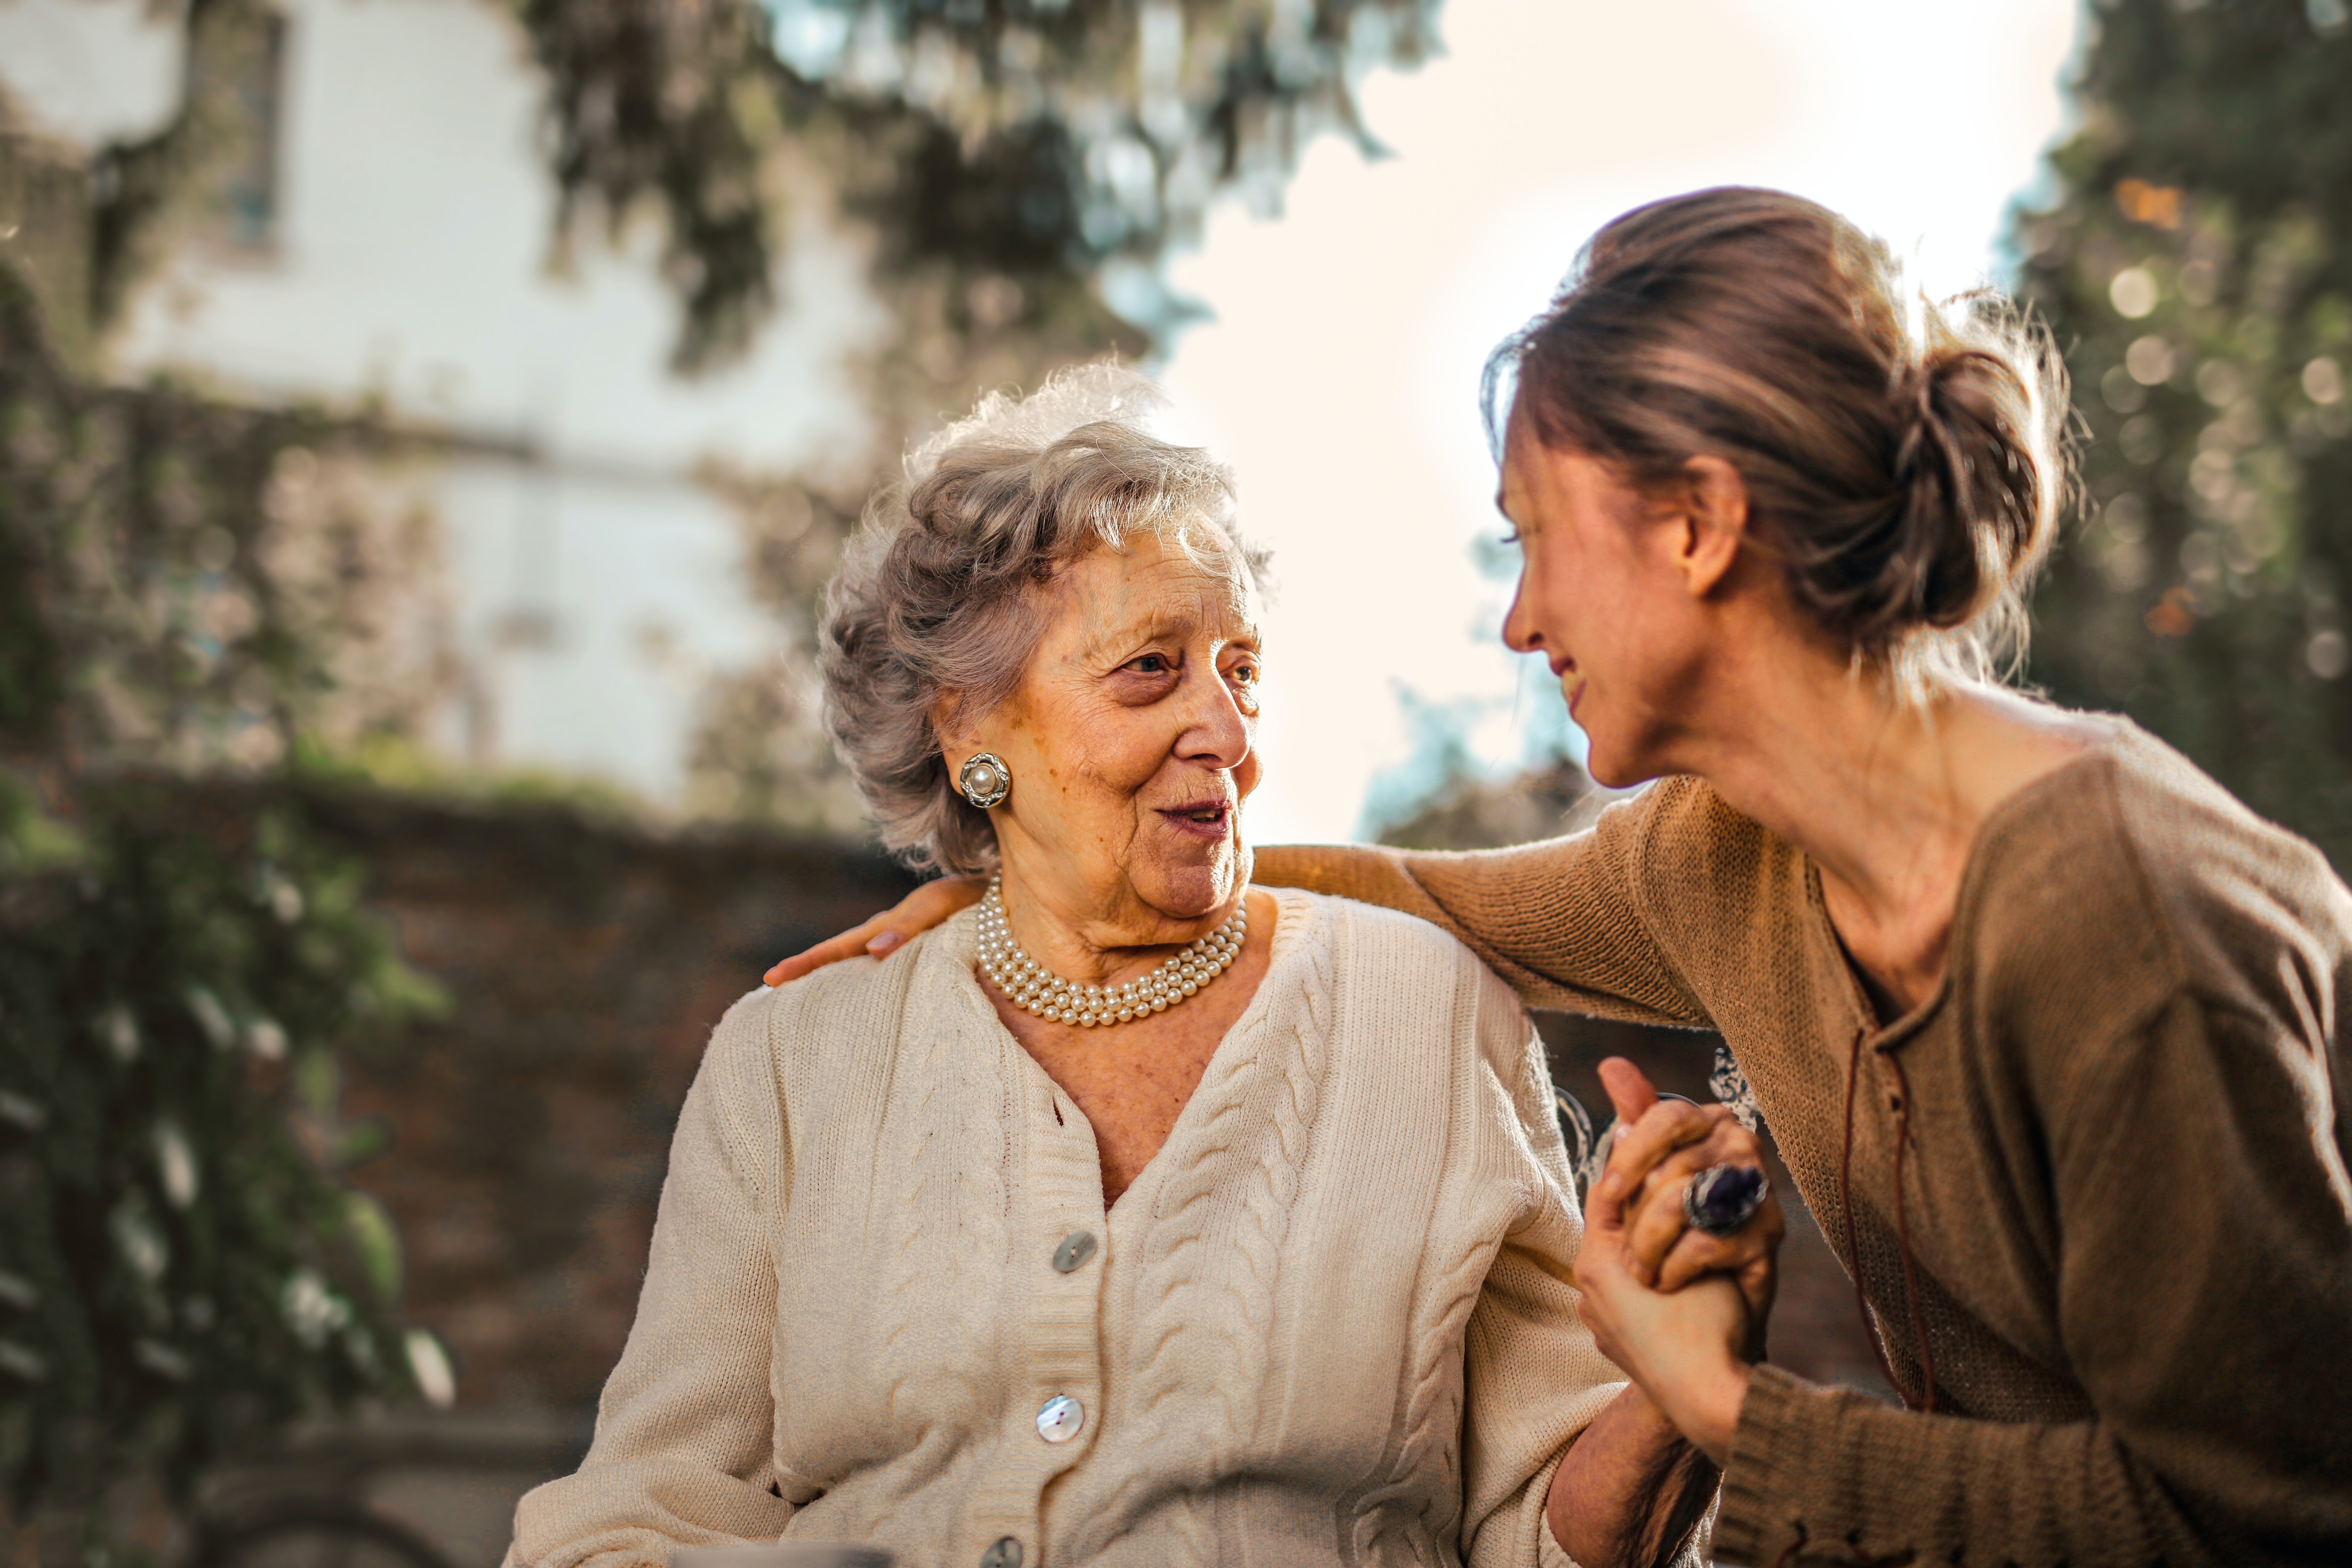 Helen was happy to reunite with Carla after all those years. | Photo: Pexels